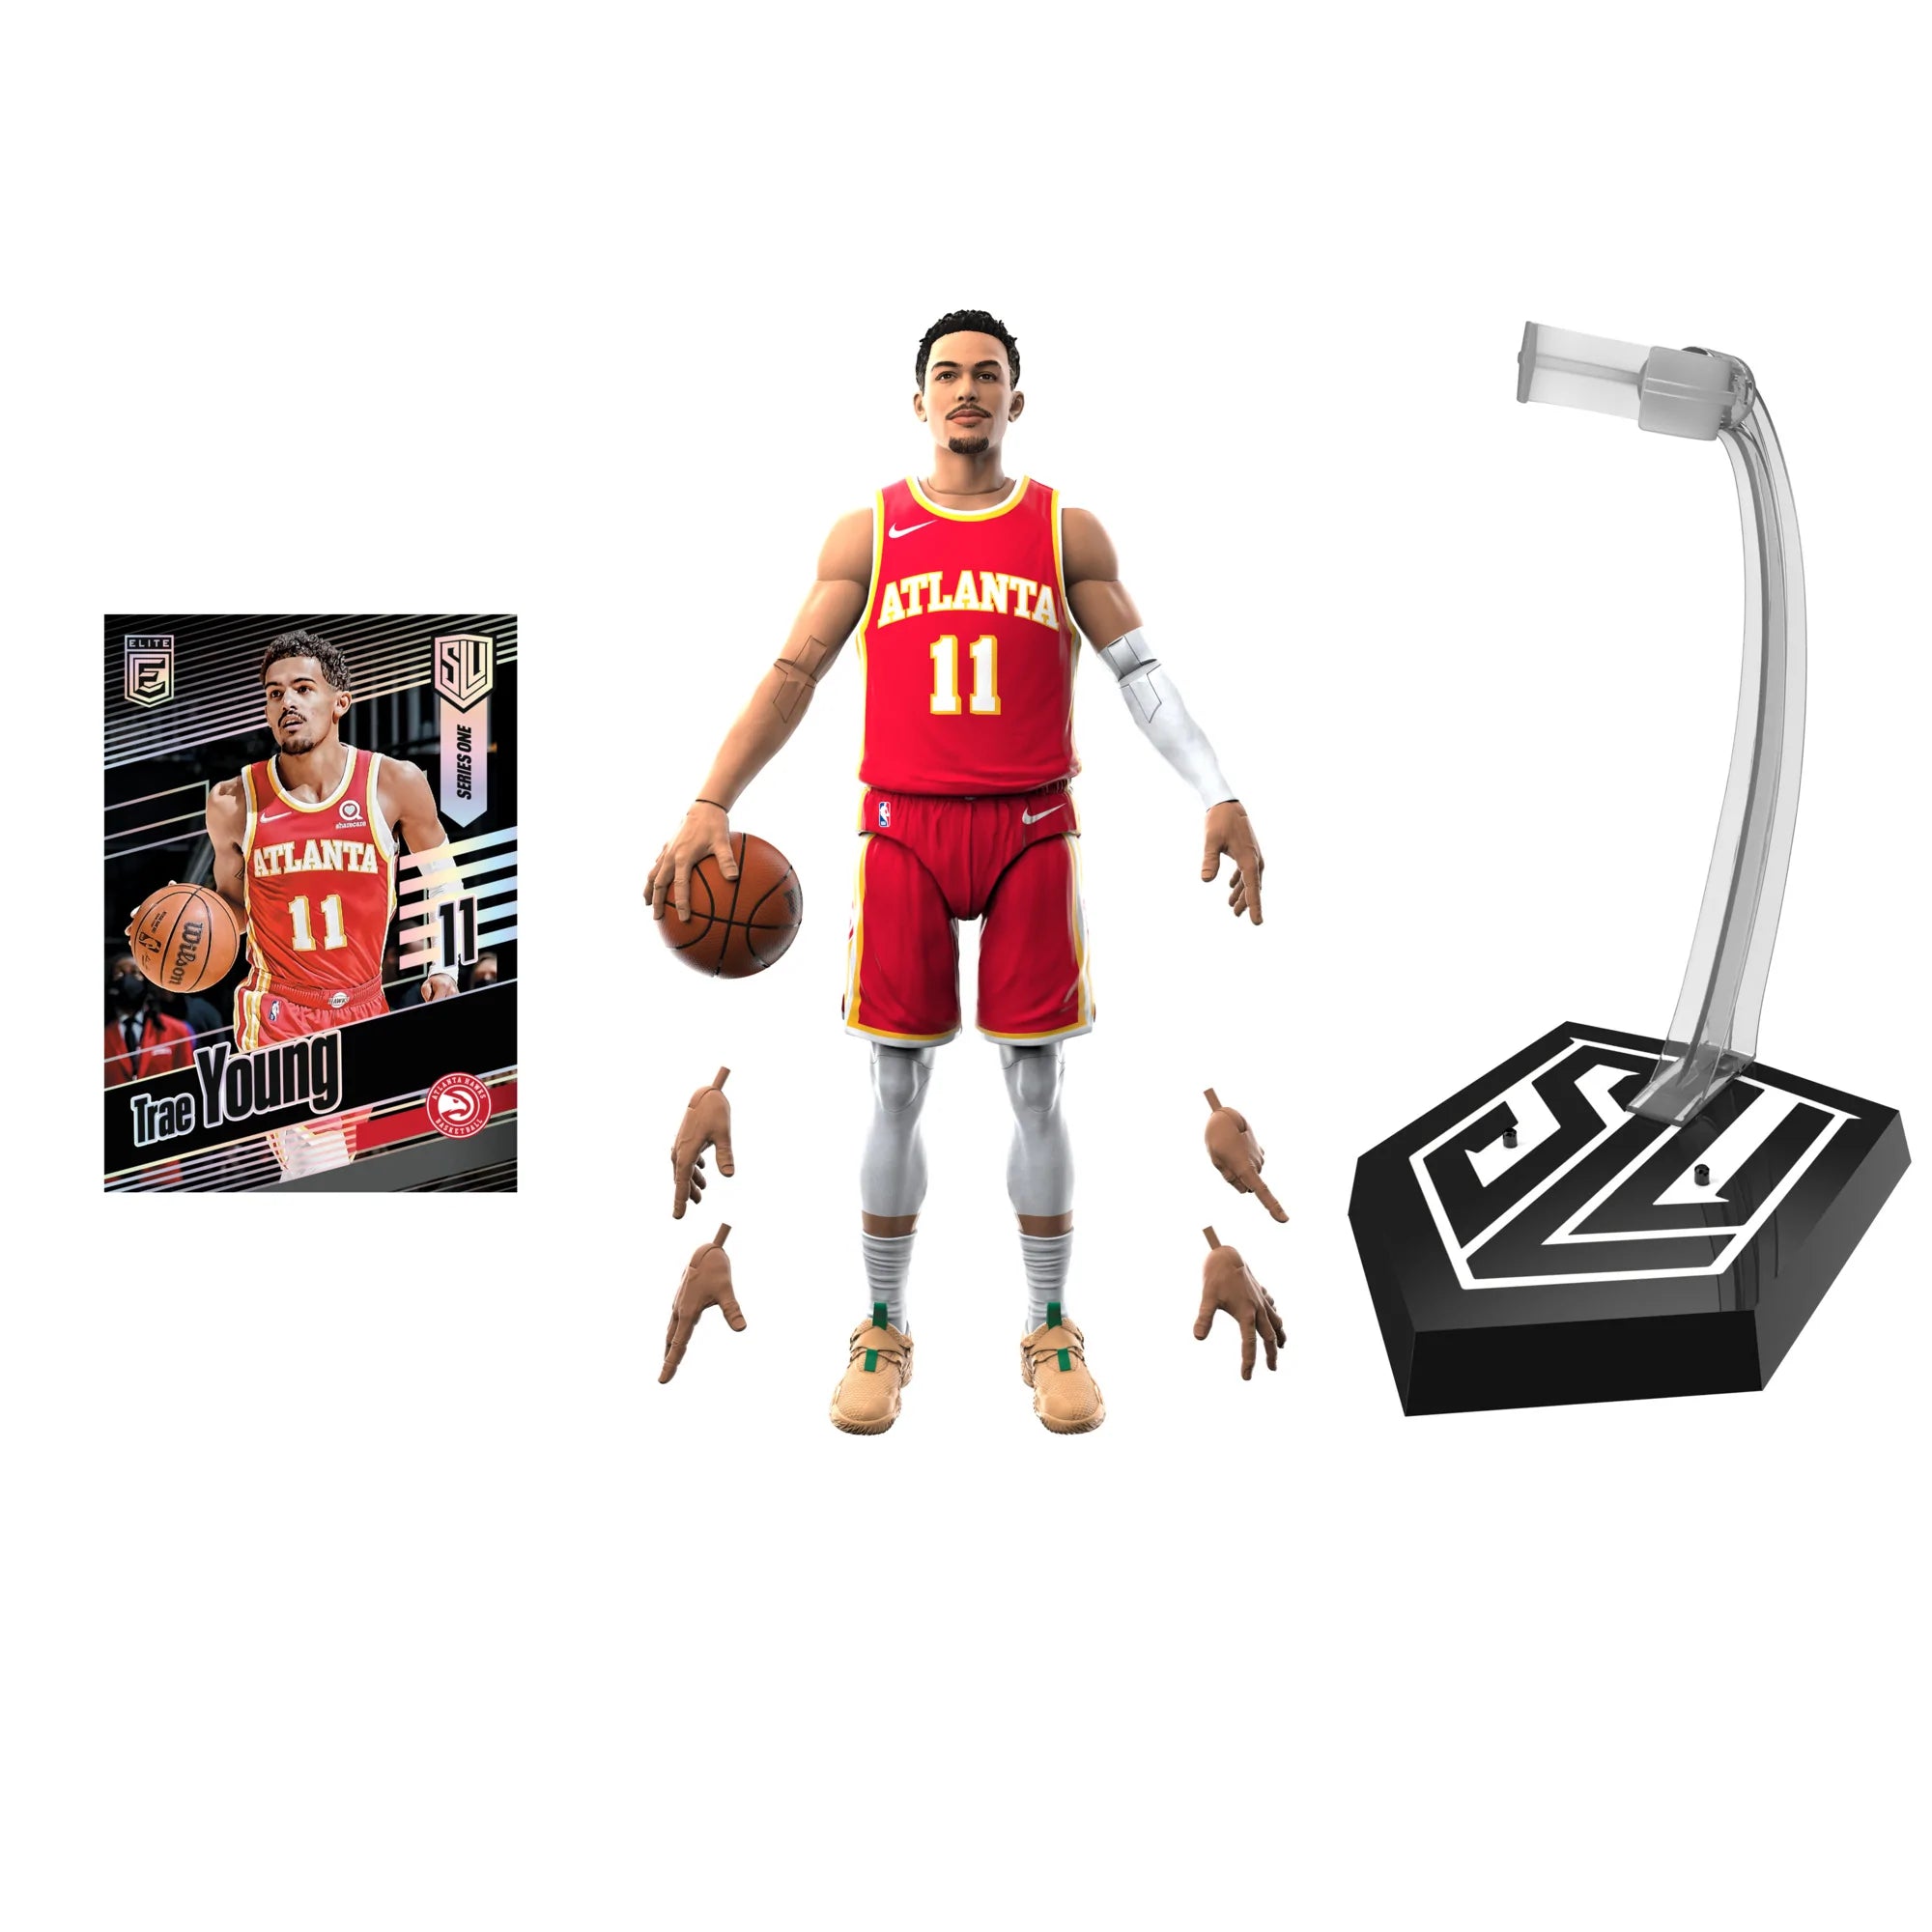 Hasbro - Starting Lineup Series 1 - NBA - Trae Young - Marvelous Toys